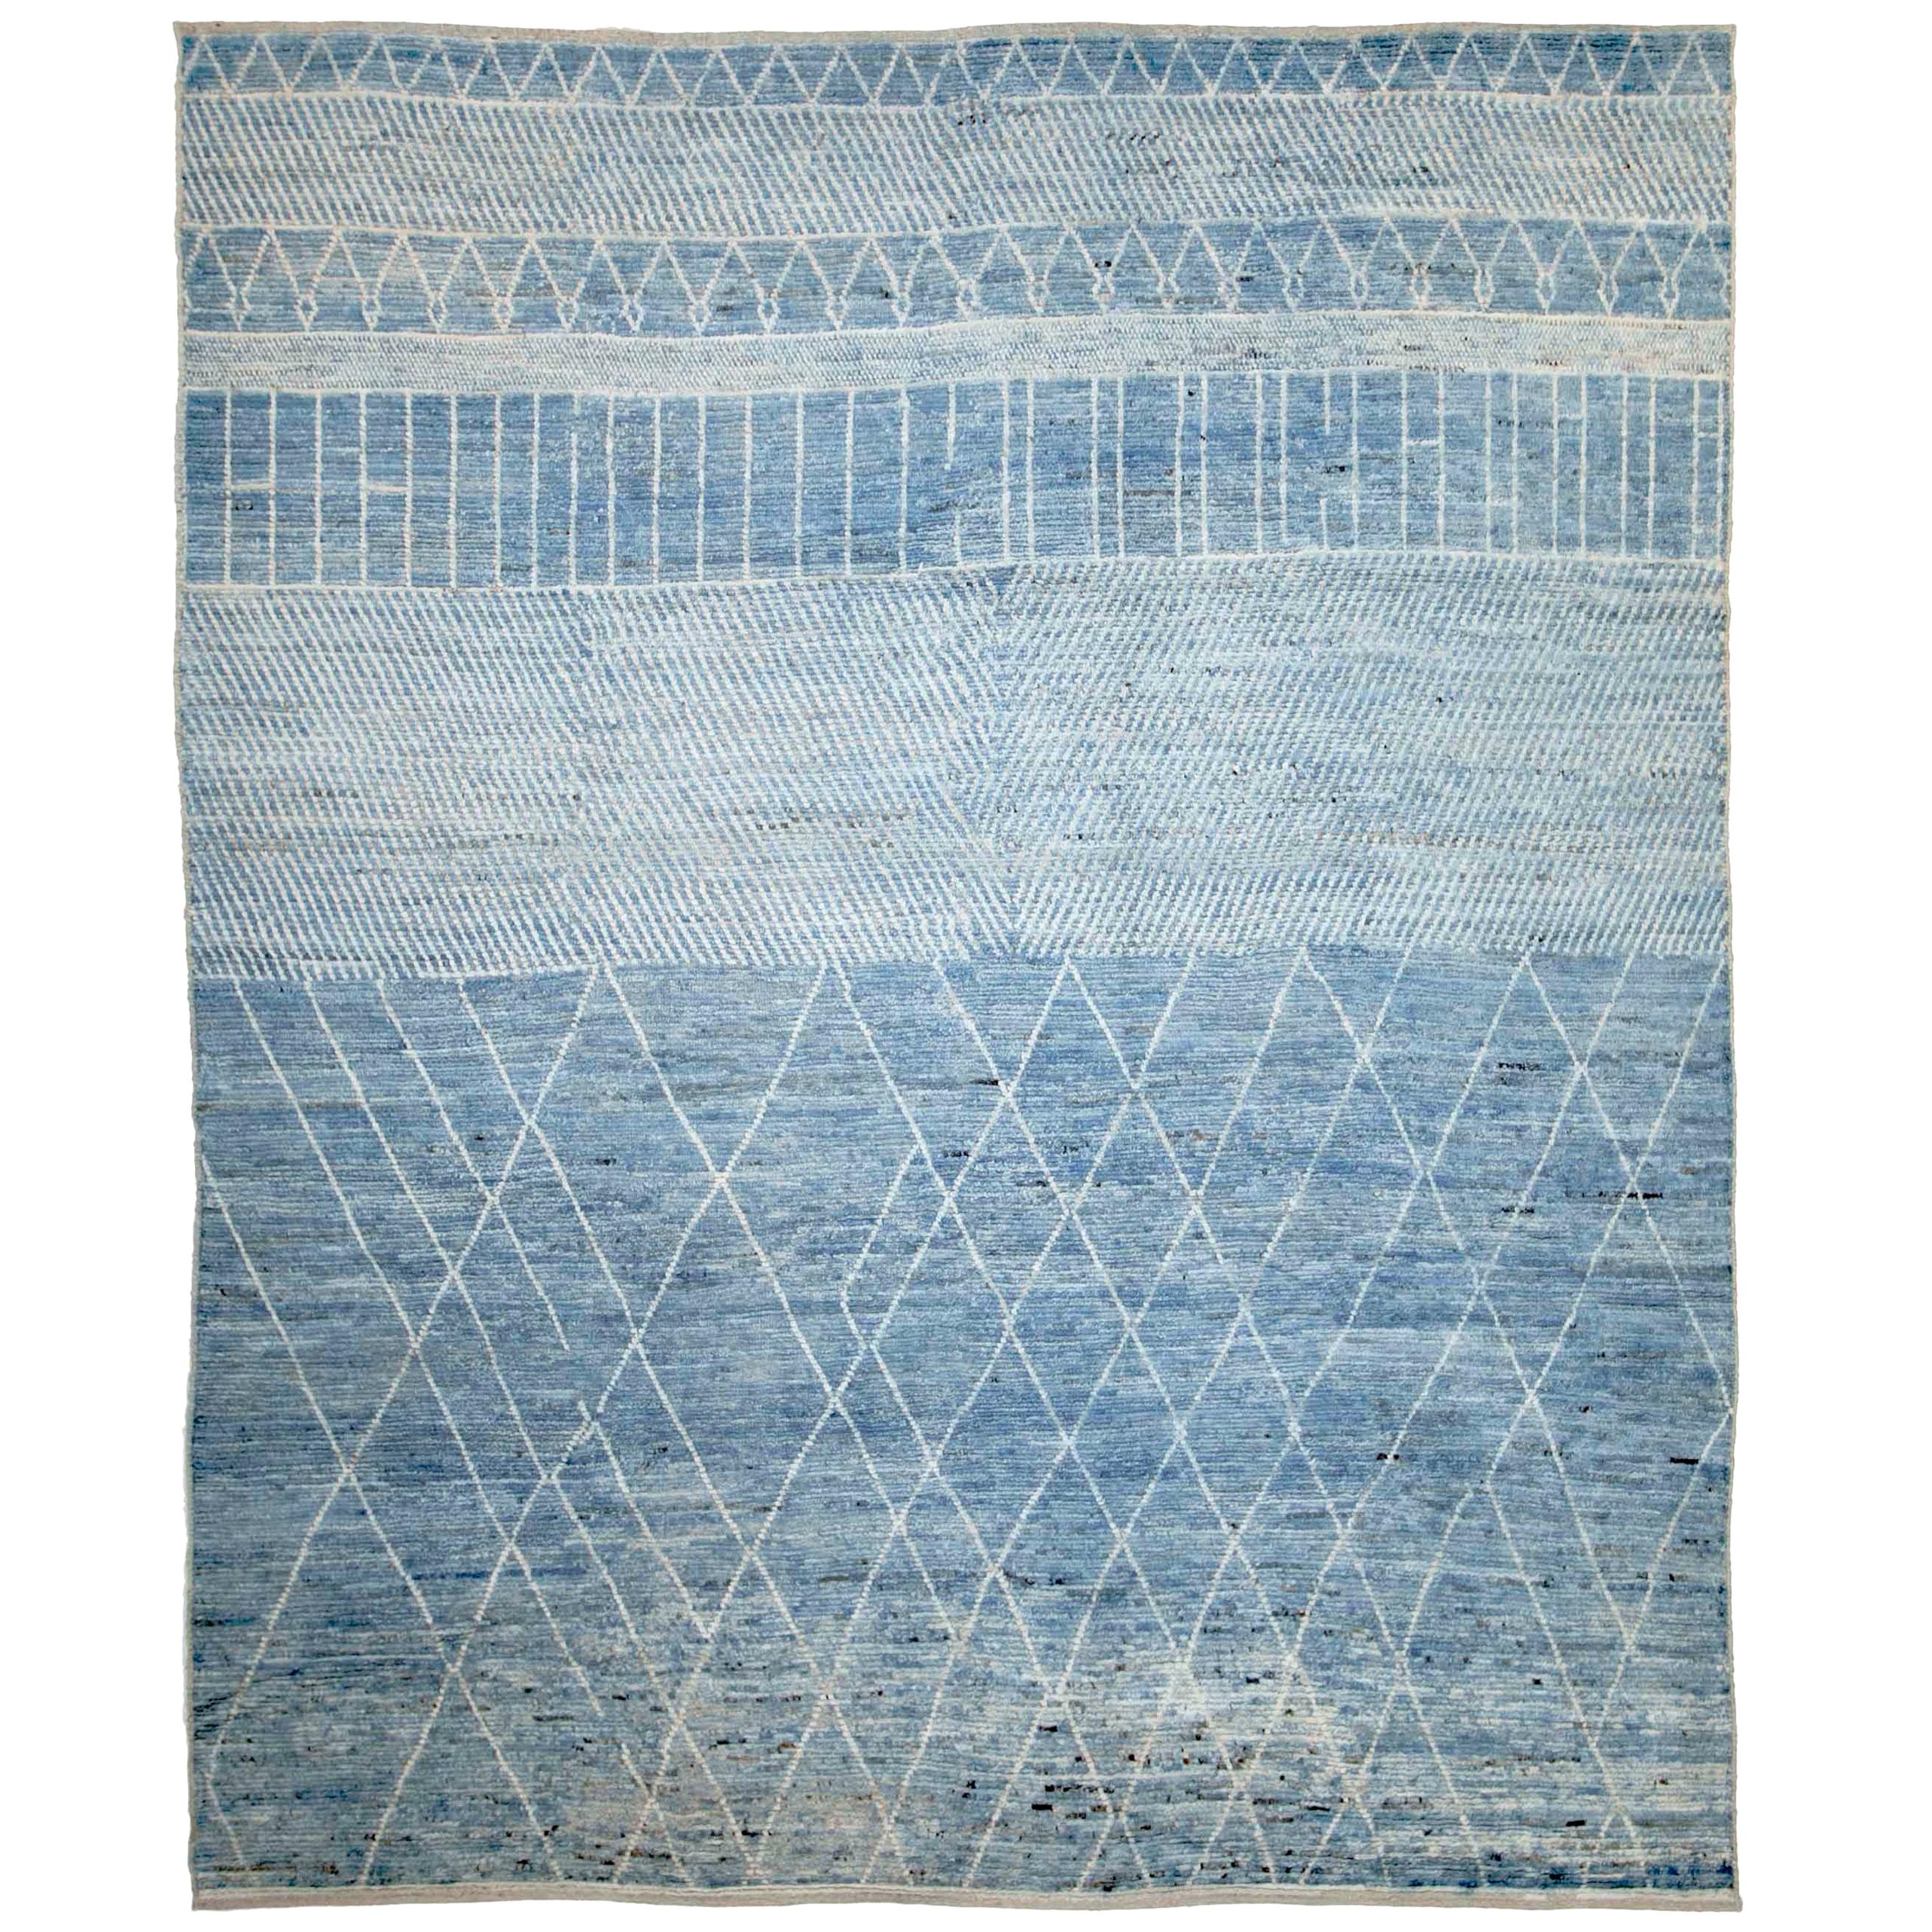 Afghan Moroccan Style Rug with White Tribal Details on Blue Field